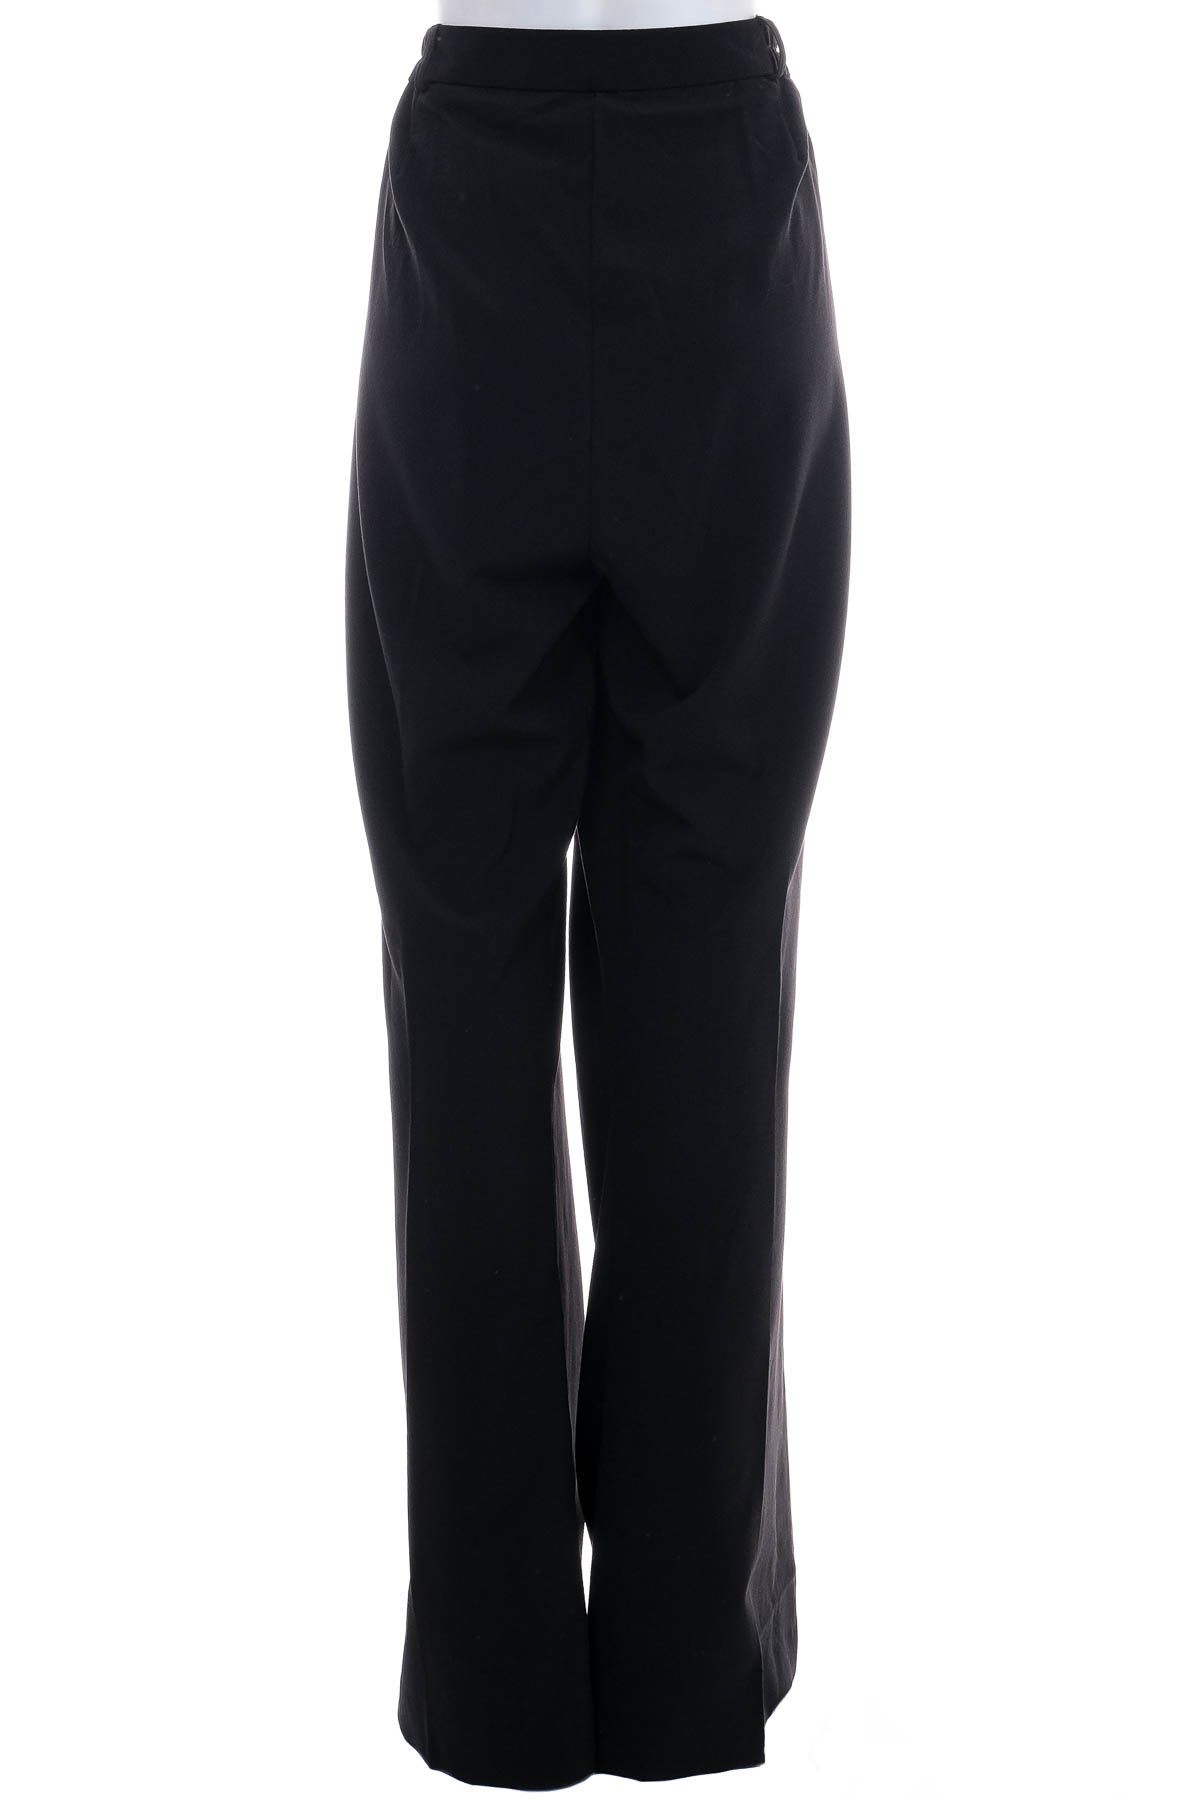 Women's trousers - Simply Be - 0